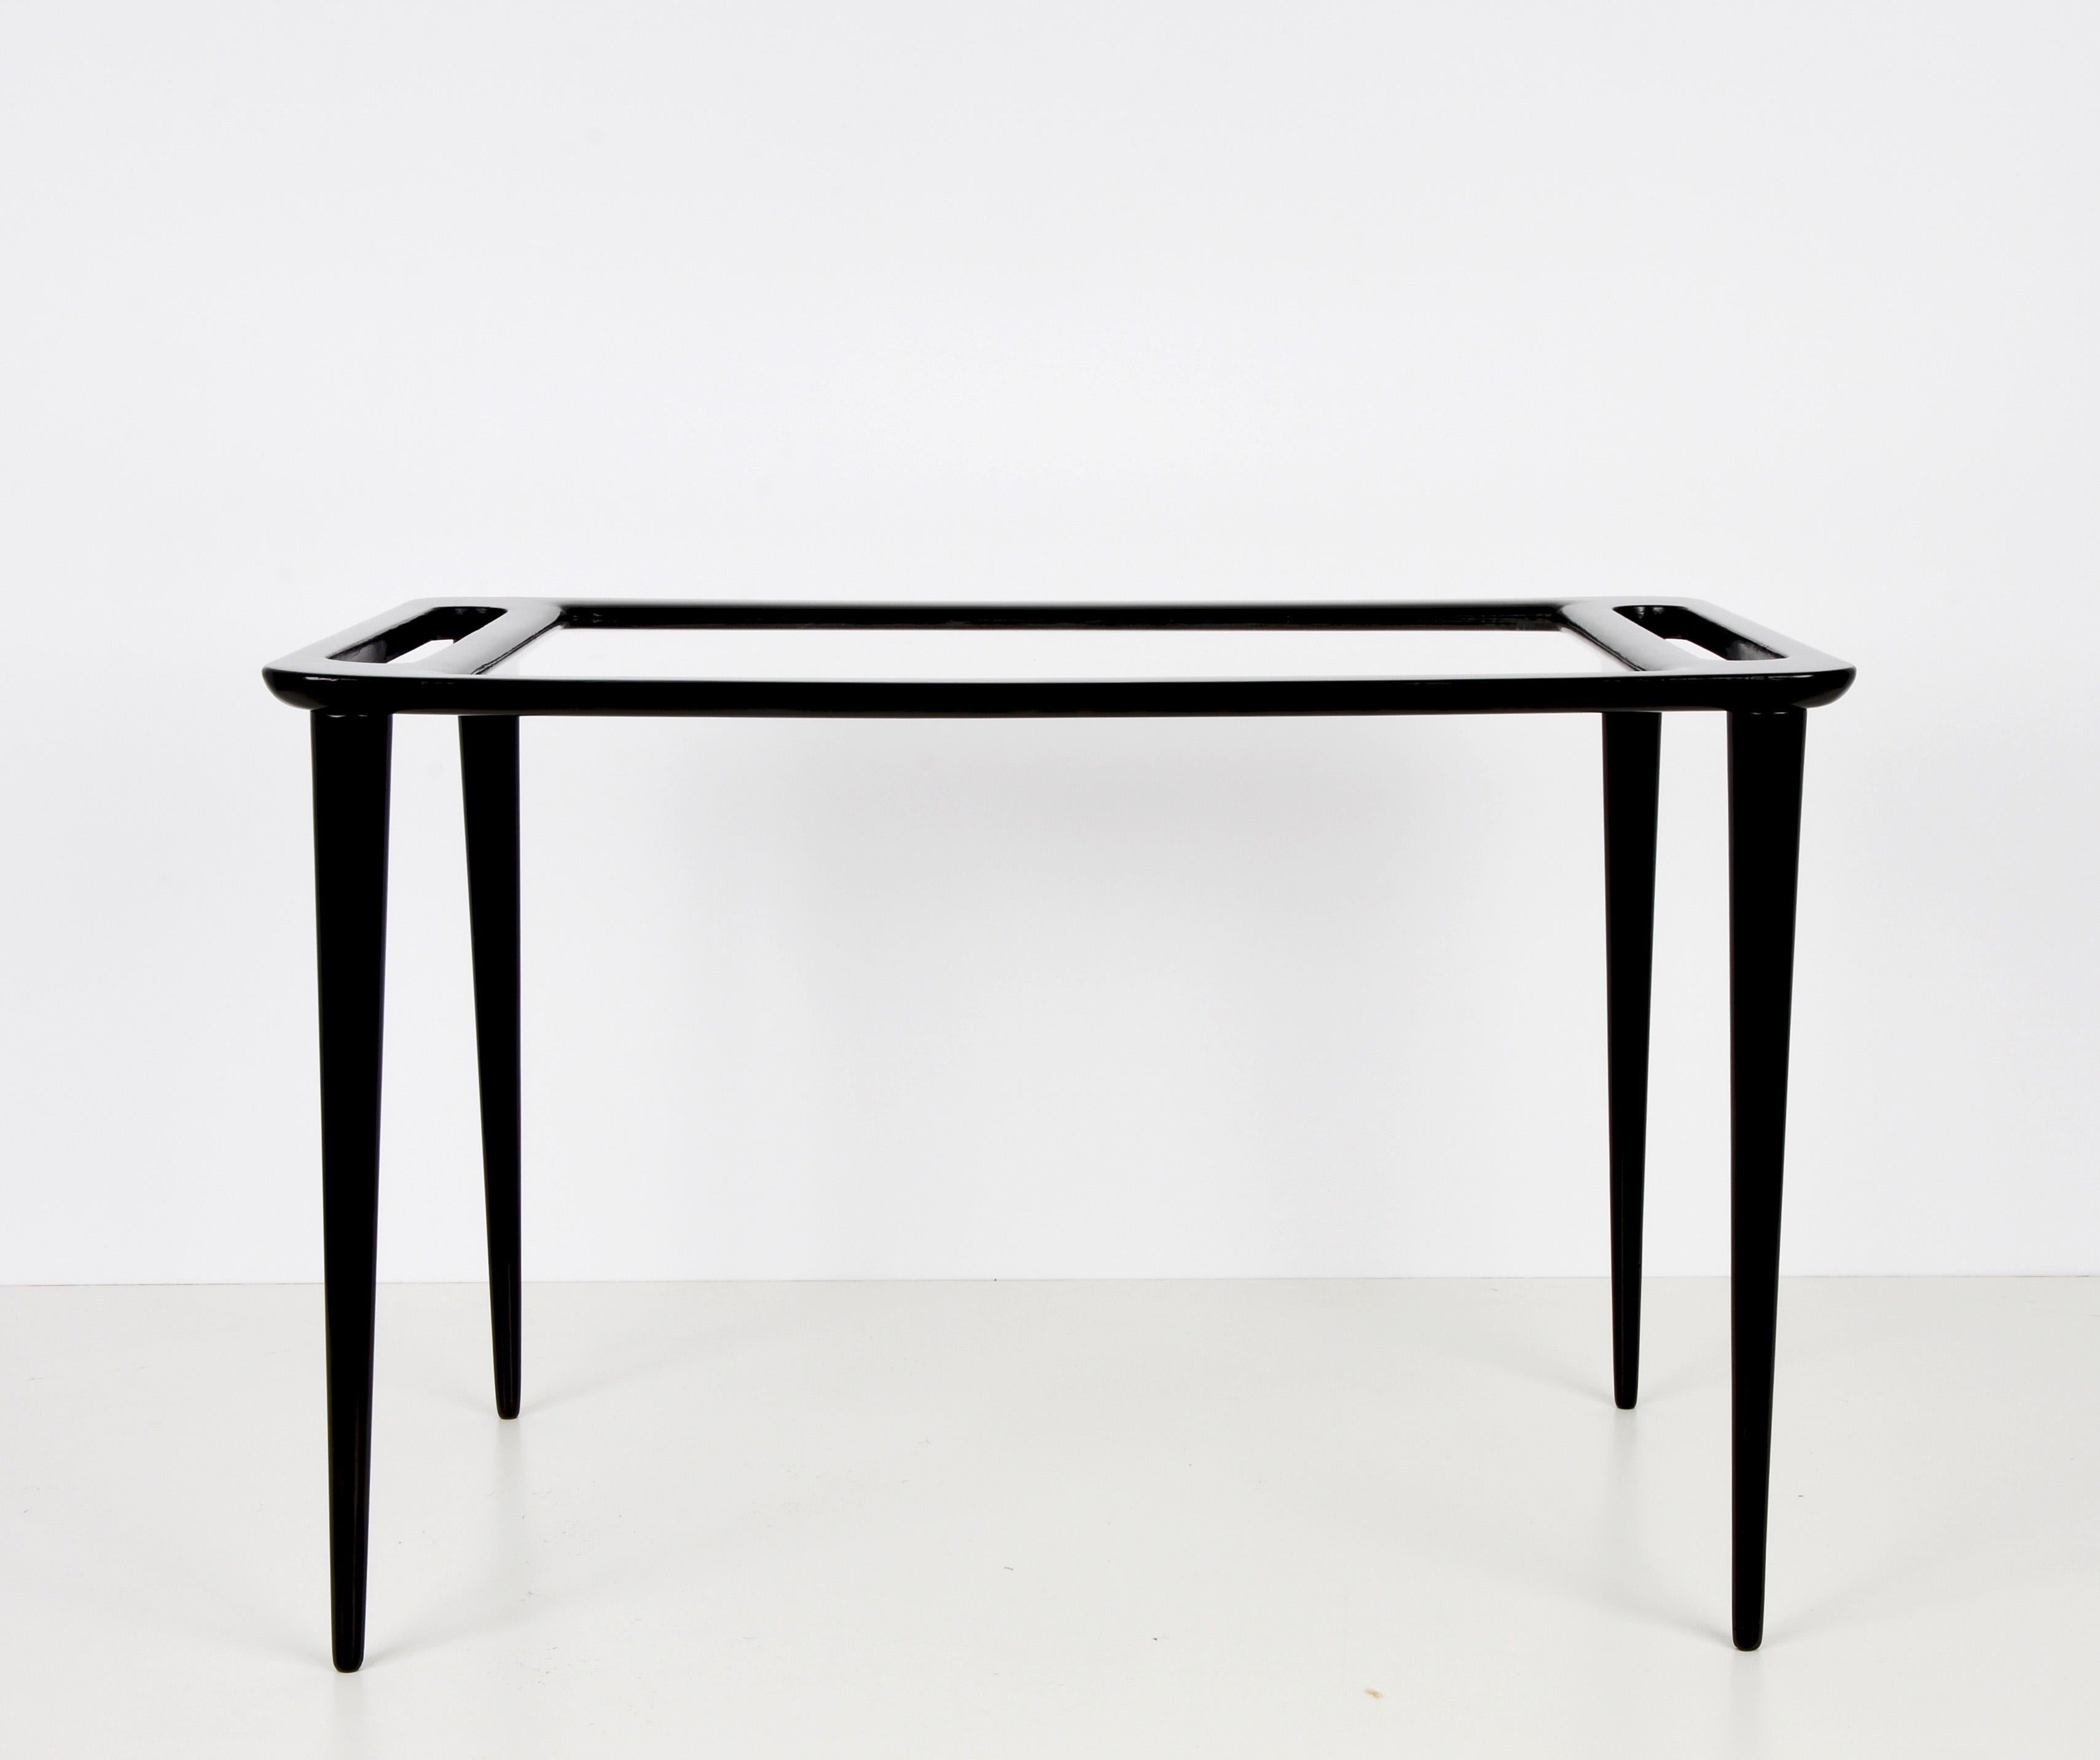 European Midcentury Ico Parisi Ebonized Wood Coffee Table with Crystal Glass, 1950s For Sale